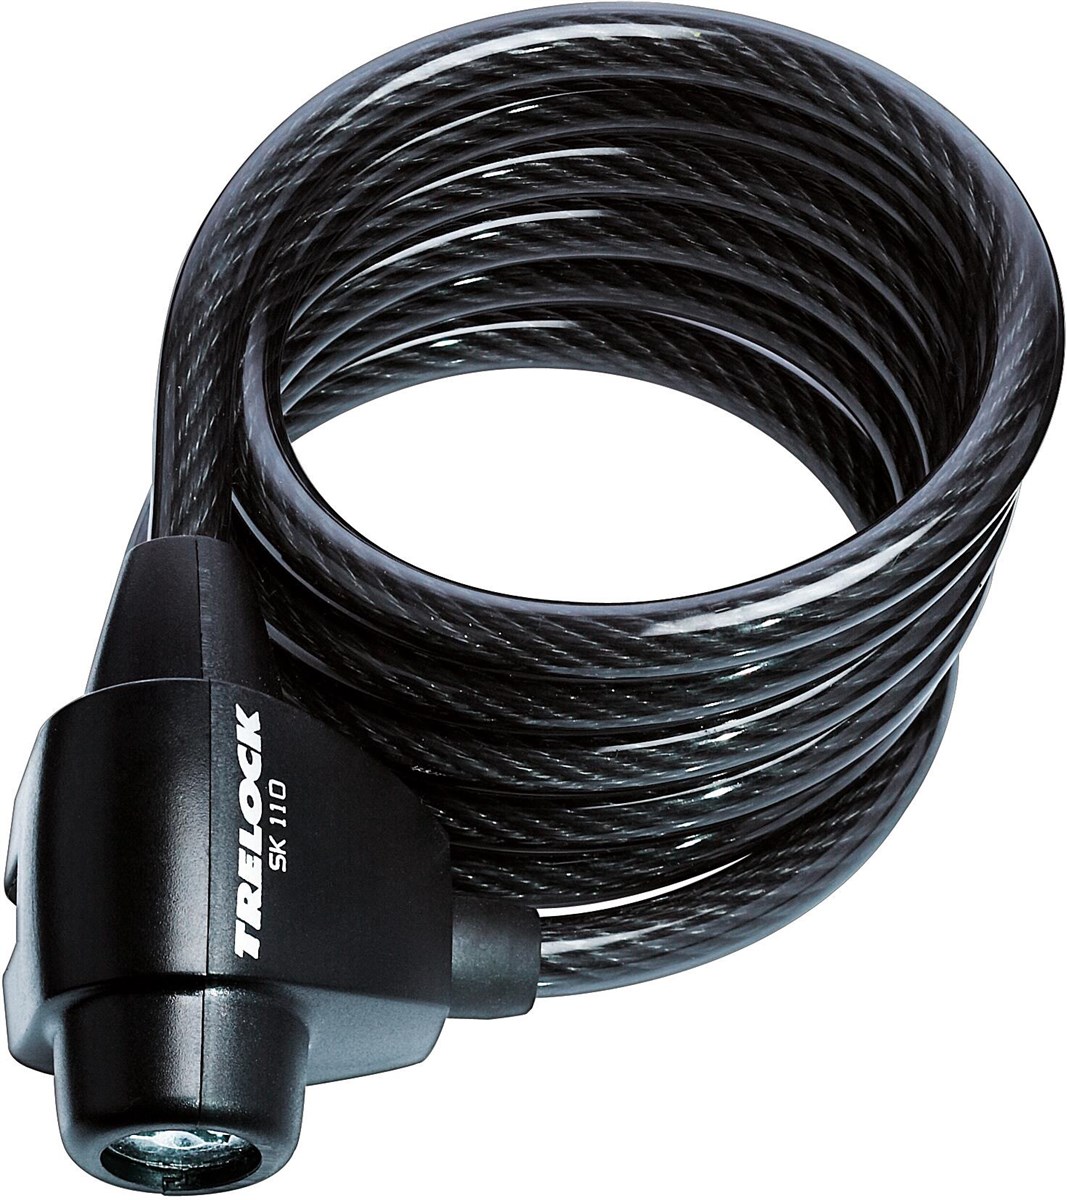 Tre-Lock Security Cable SK110 product image